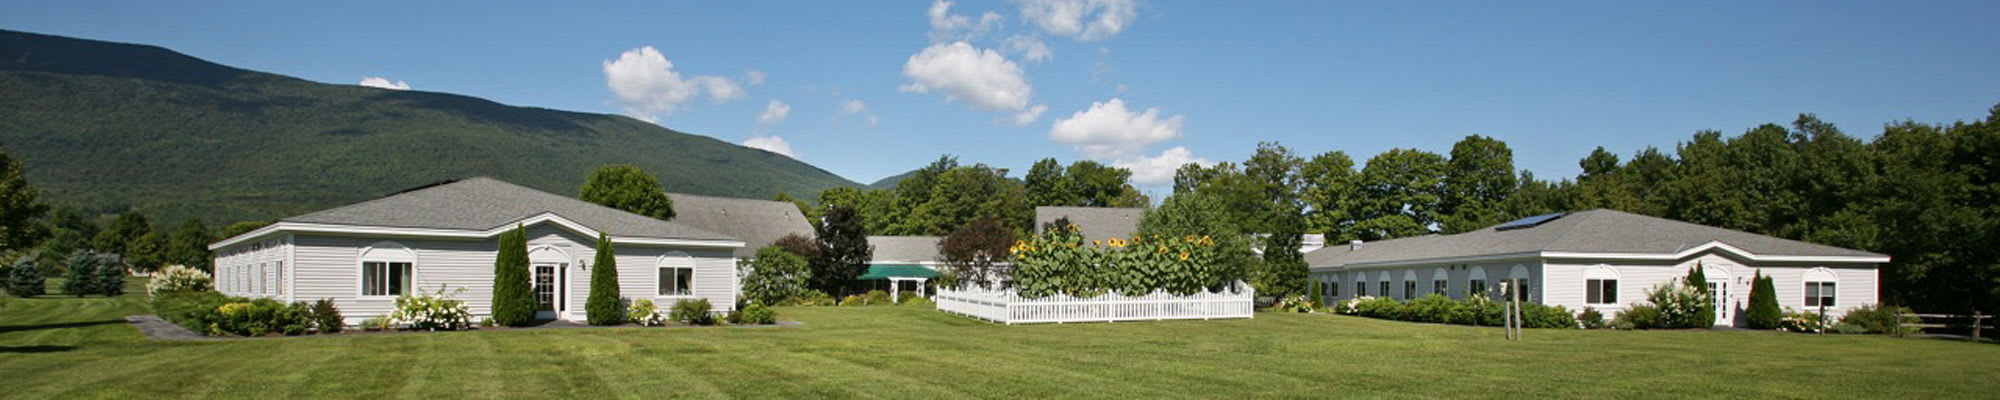 Photos of Equinox Terrace in Manchester Center, Vermont